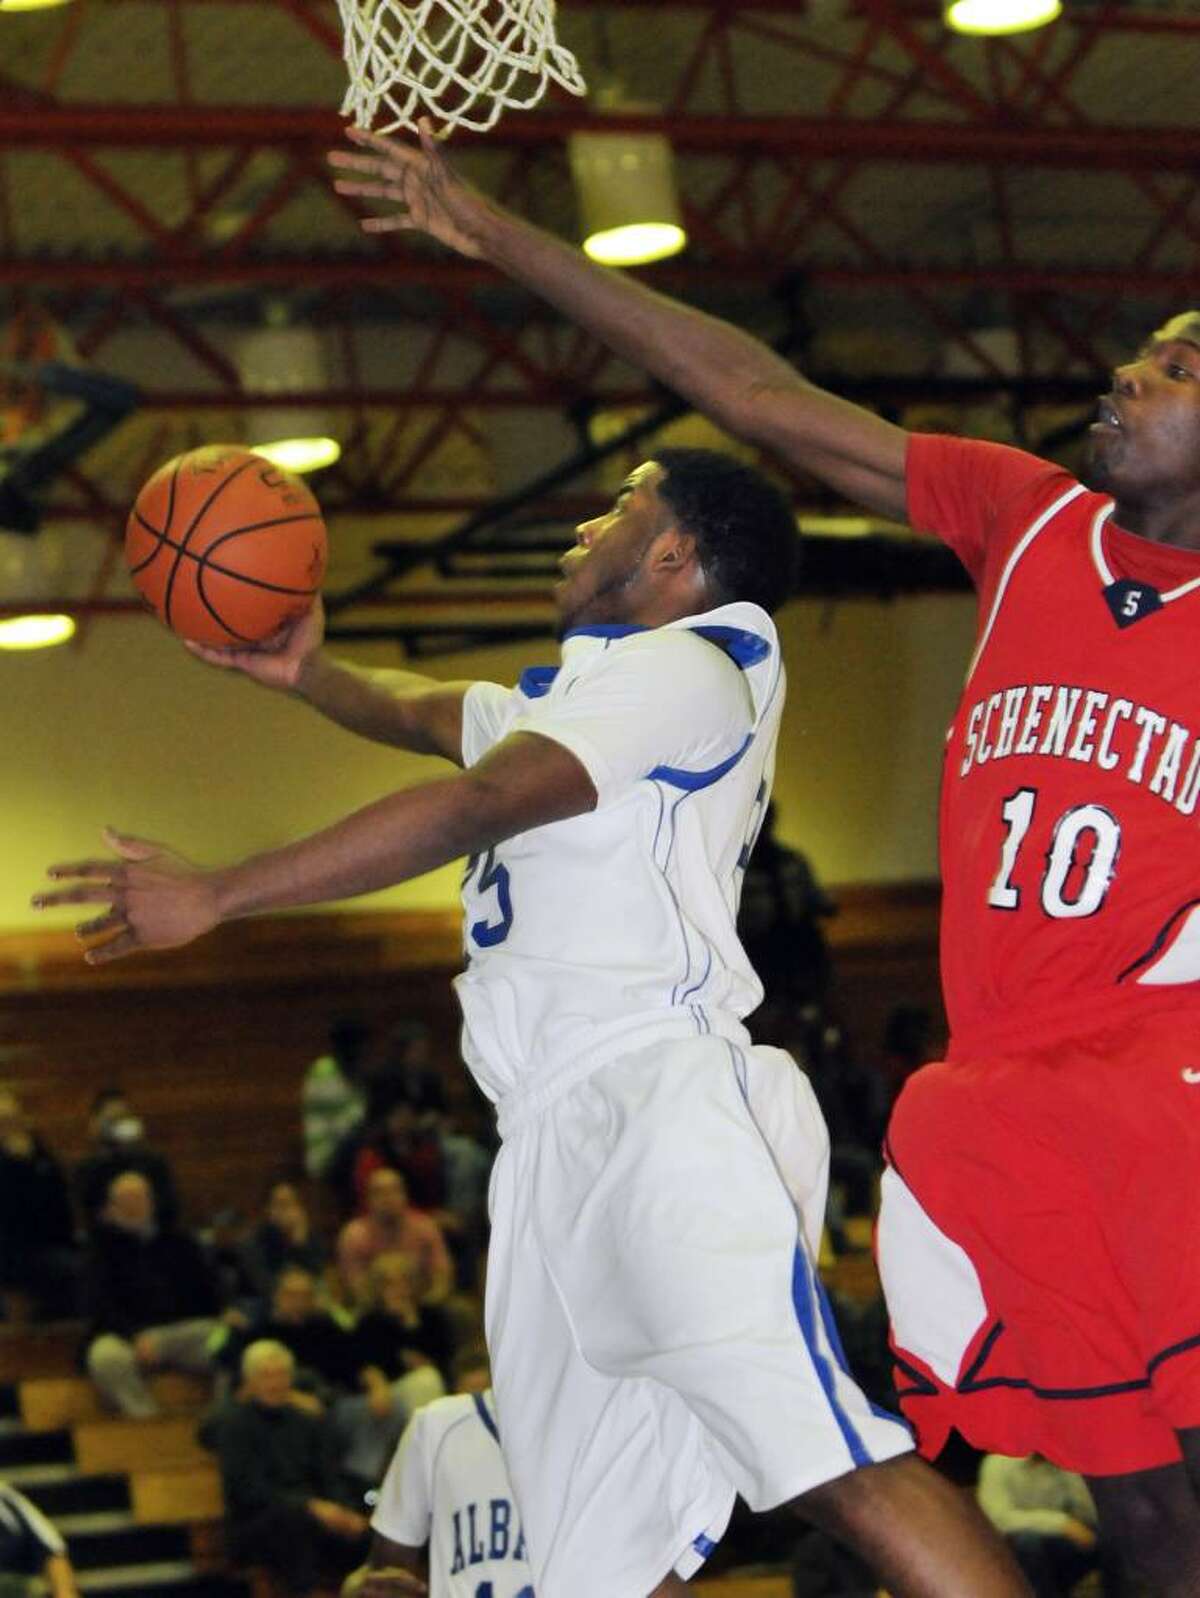 Albany's Jaylon Glasgow, left, goes up for a basket as Schenectady's Jallah Tarver defends during their basketball game on Friday at Albany High. Albany won 72-65. (Cindy Schultz / Times Union)